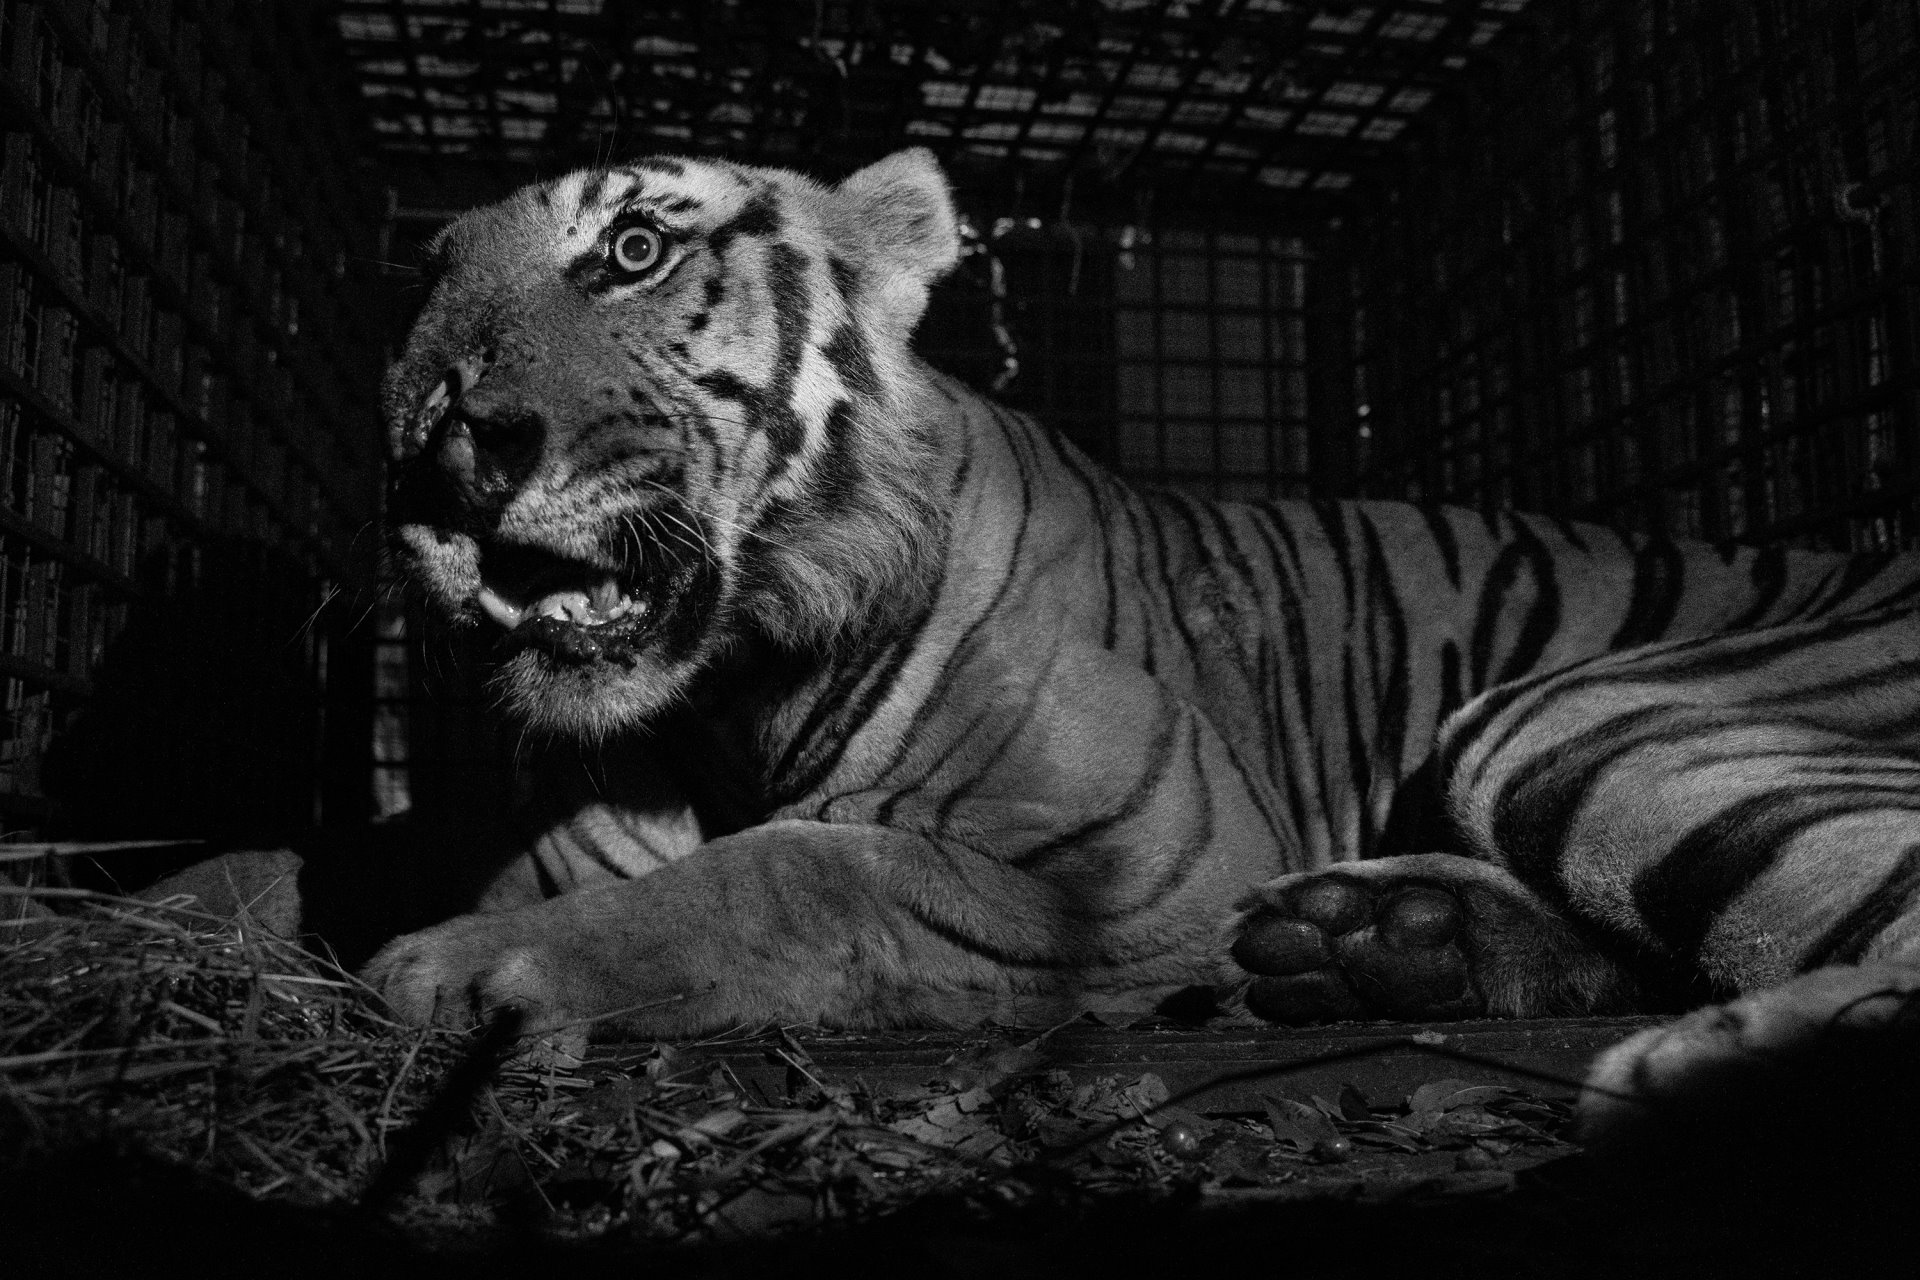 A tiger named T23 lies in a cage after being captured near the Mudumalai Tiger Reserve, in Tamil Nadu, India. T23 had killed four humans and up to 40 cattle, and was taken to a rehabilitation center after capture.